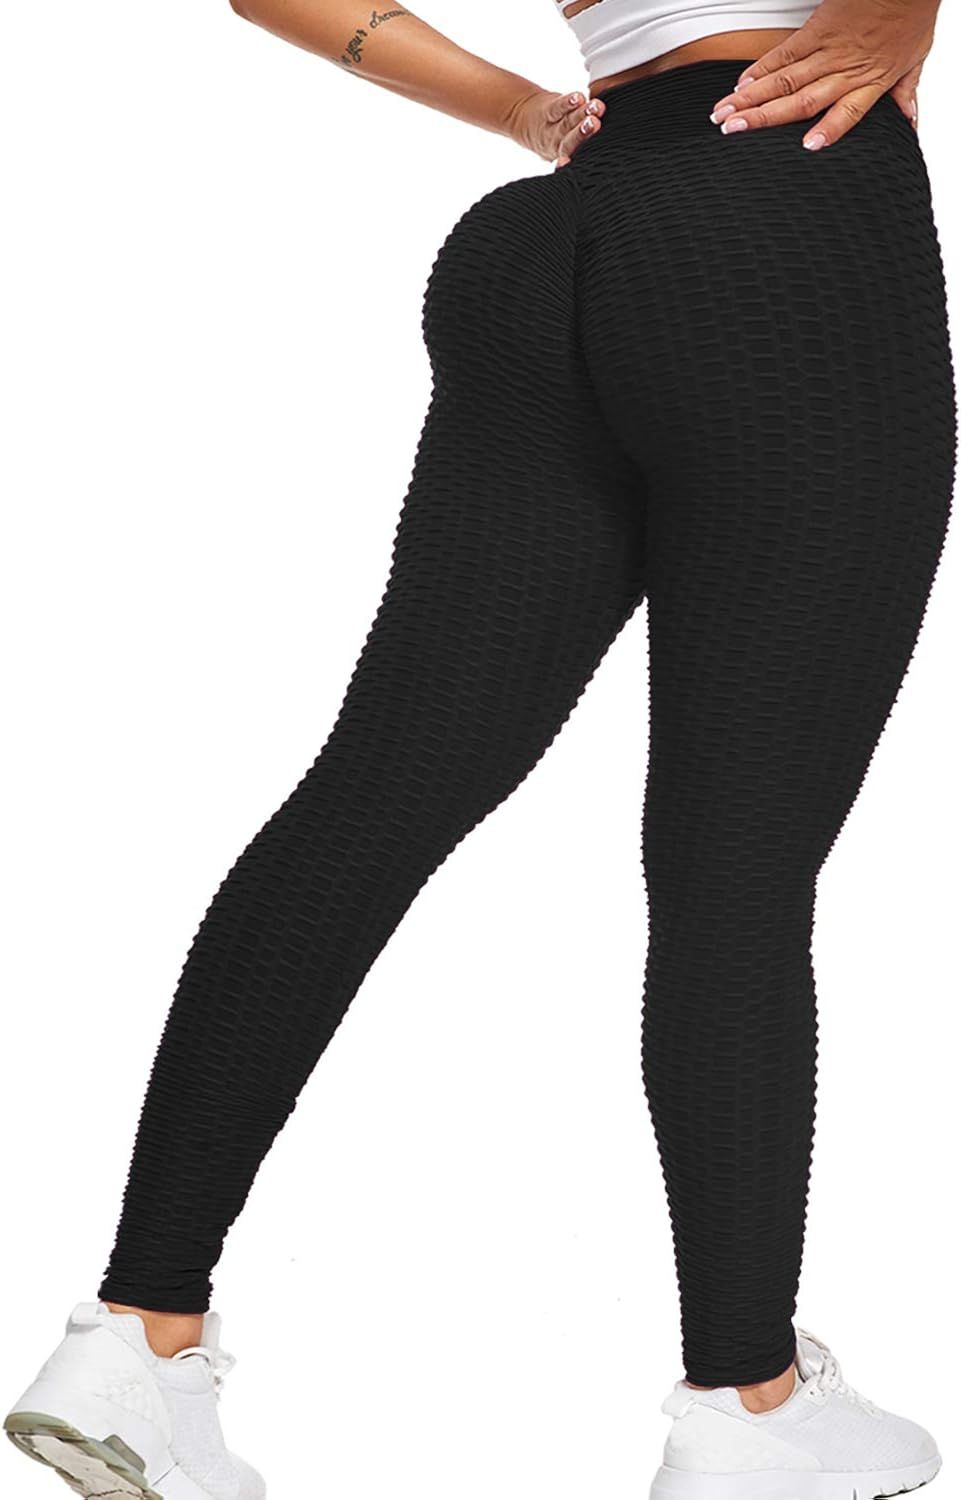 LUODITO Women's High Waist Yoga Pants Tummy Control Workout Ruched Butt Lifting Stretchy Leggings... | Amazon (US)